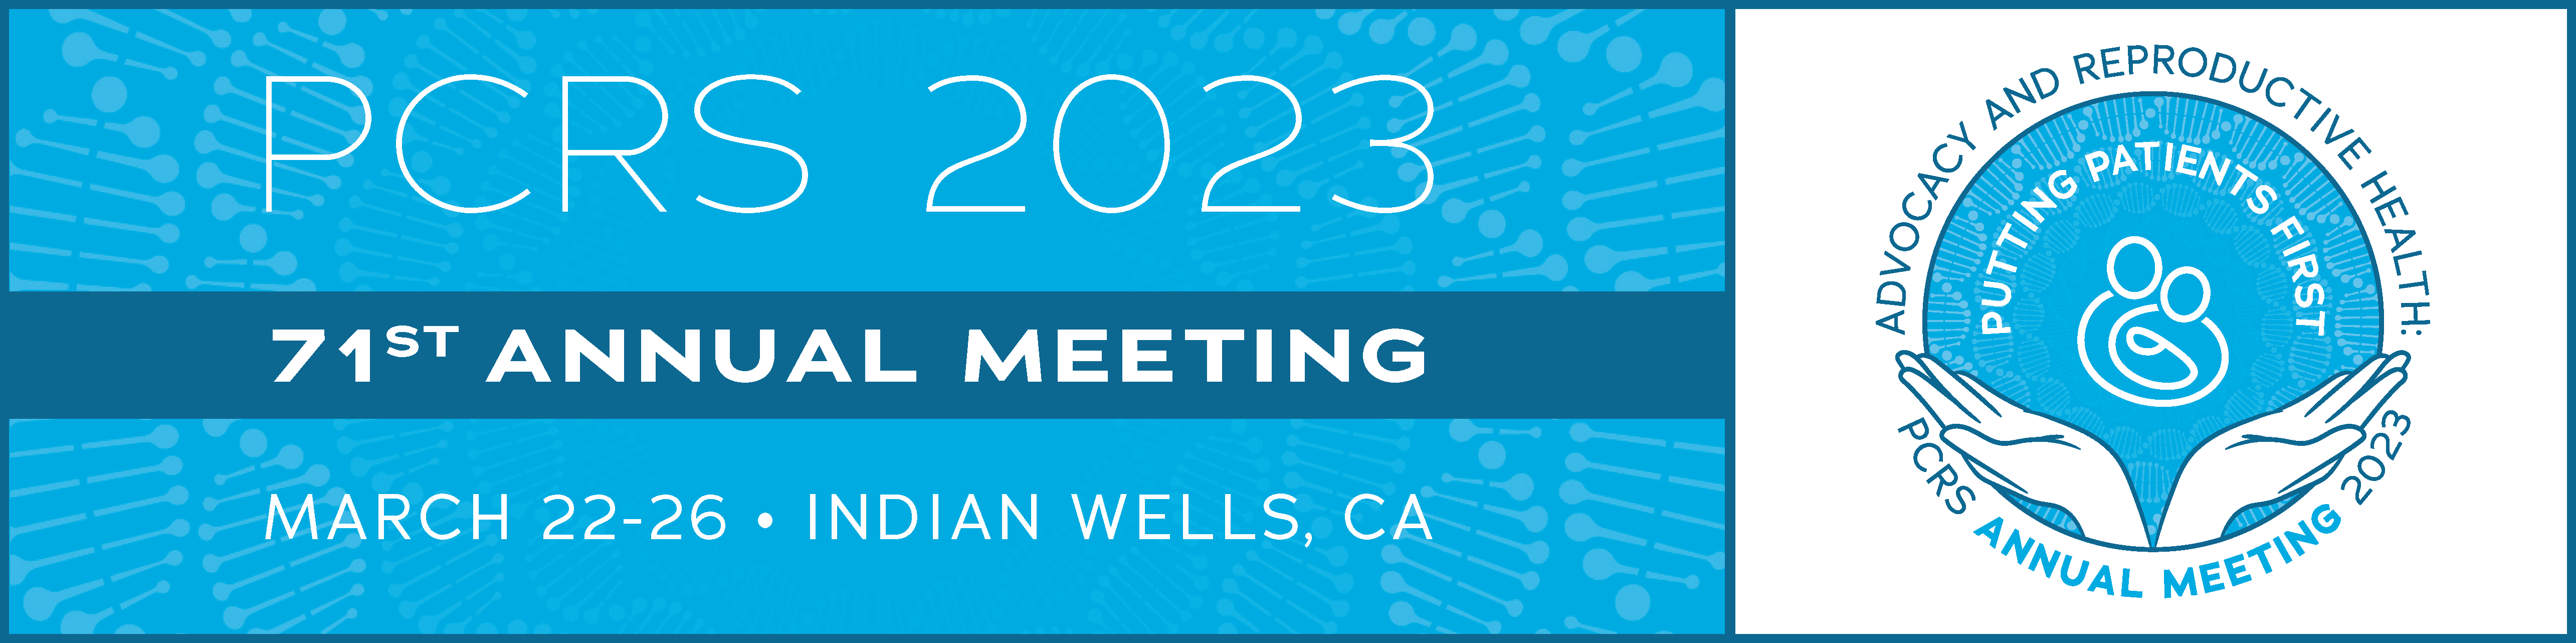 PCRS 2023 Annual Meeting